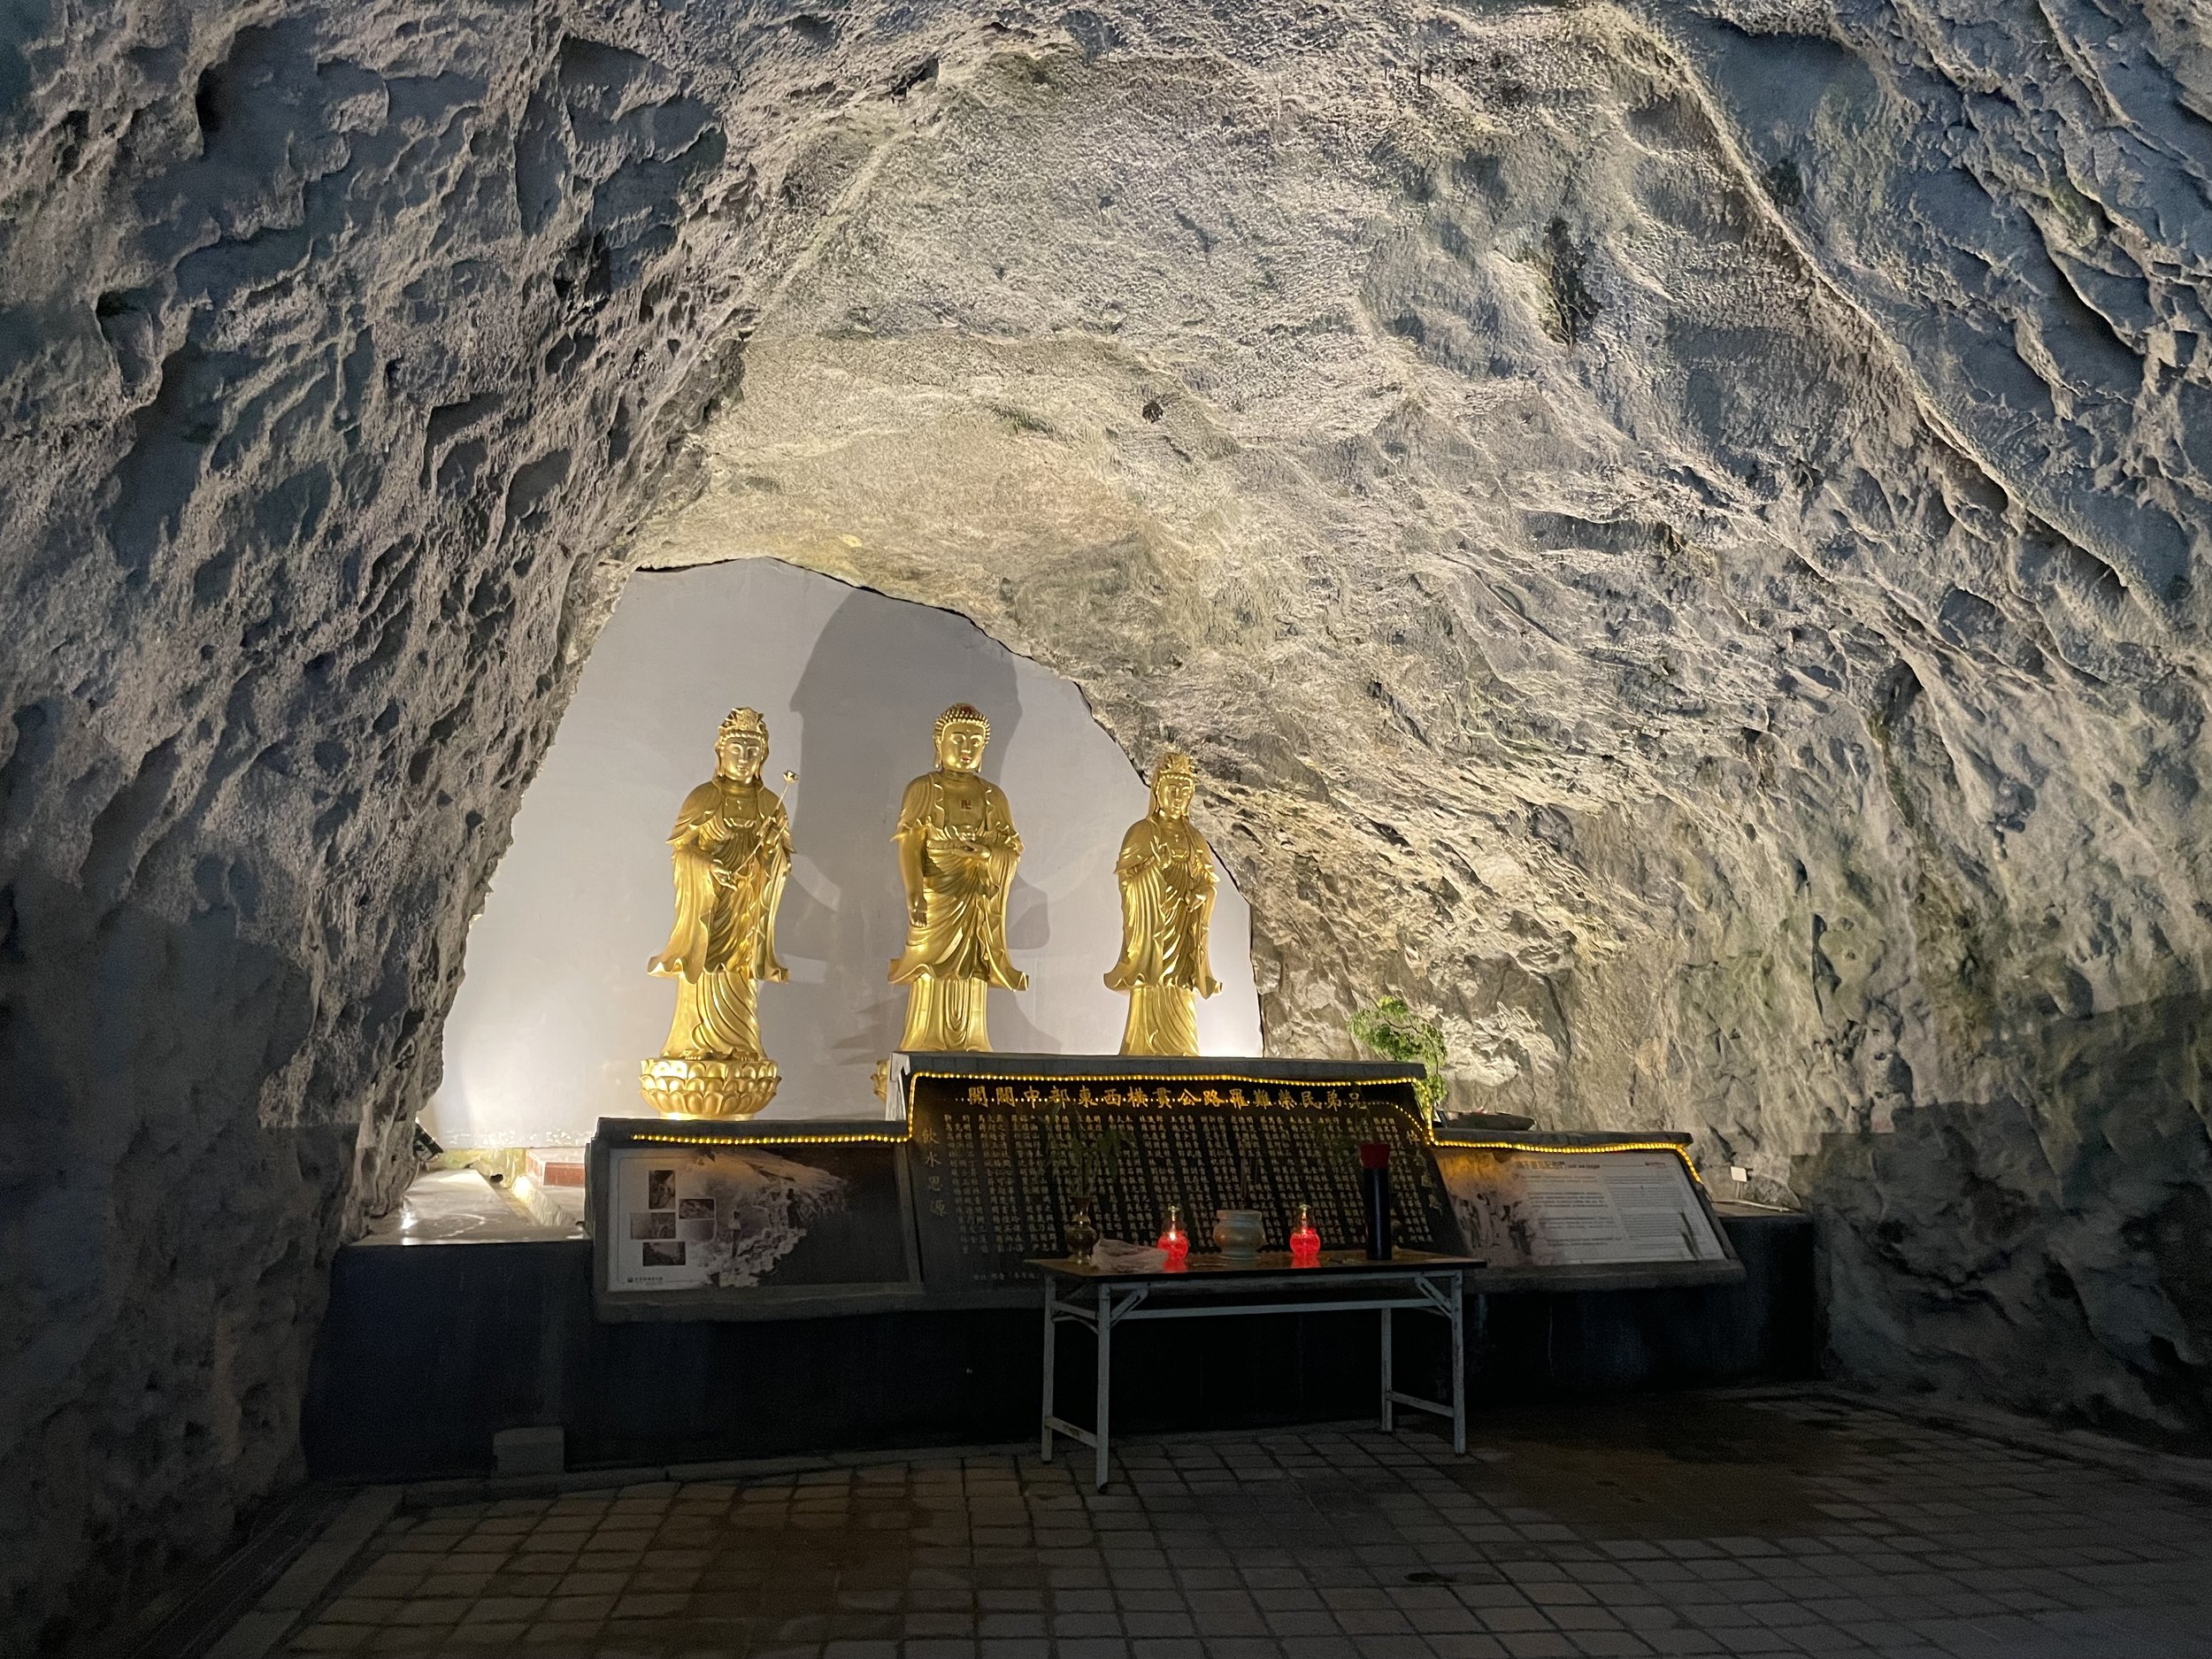 Gold Statues in Cave, Shrine of the Eternal Spring, Taroko Gorge